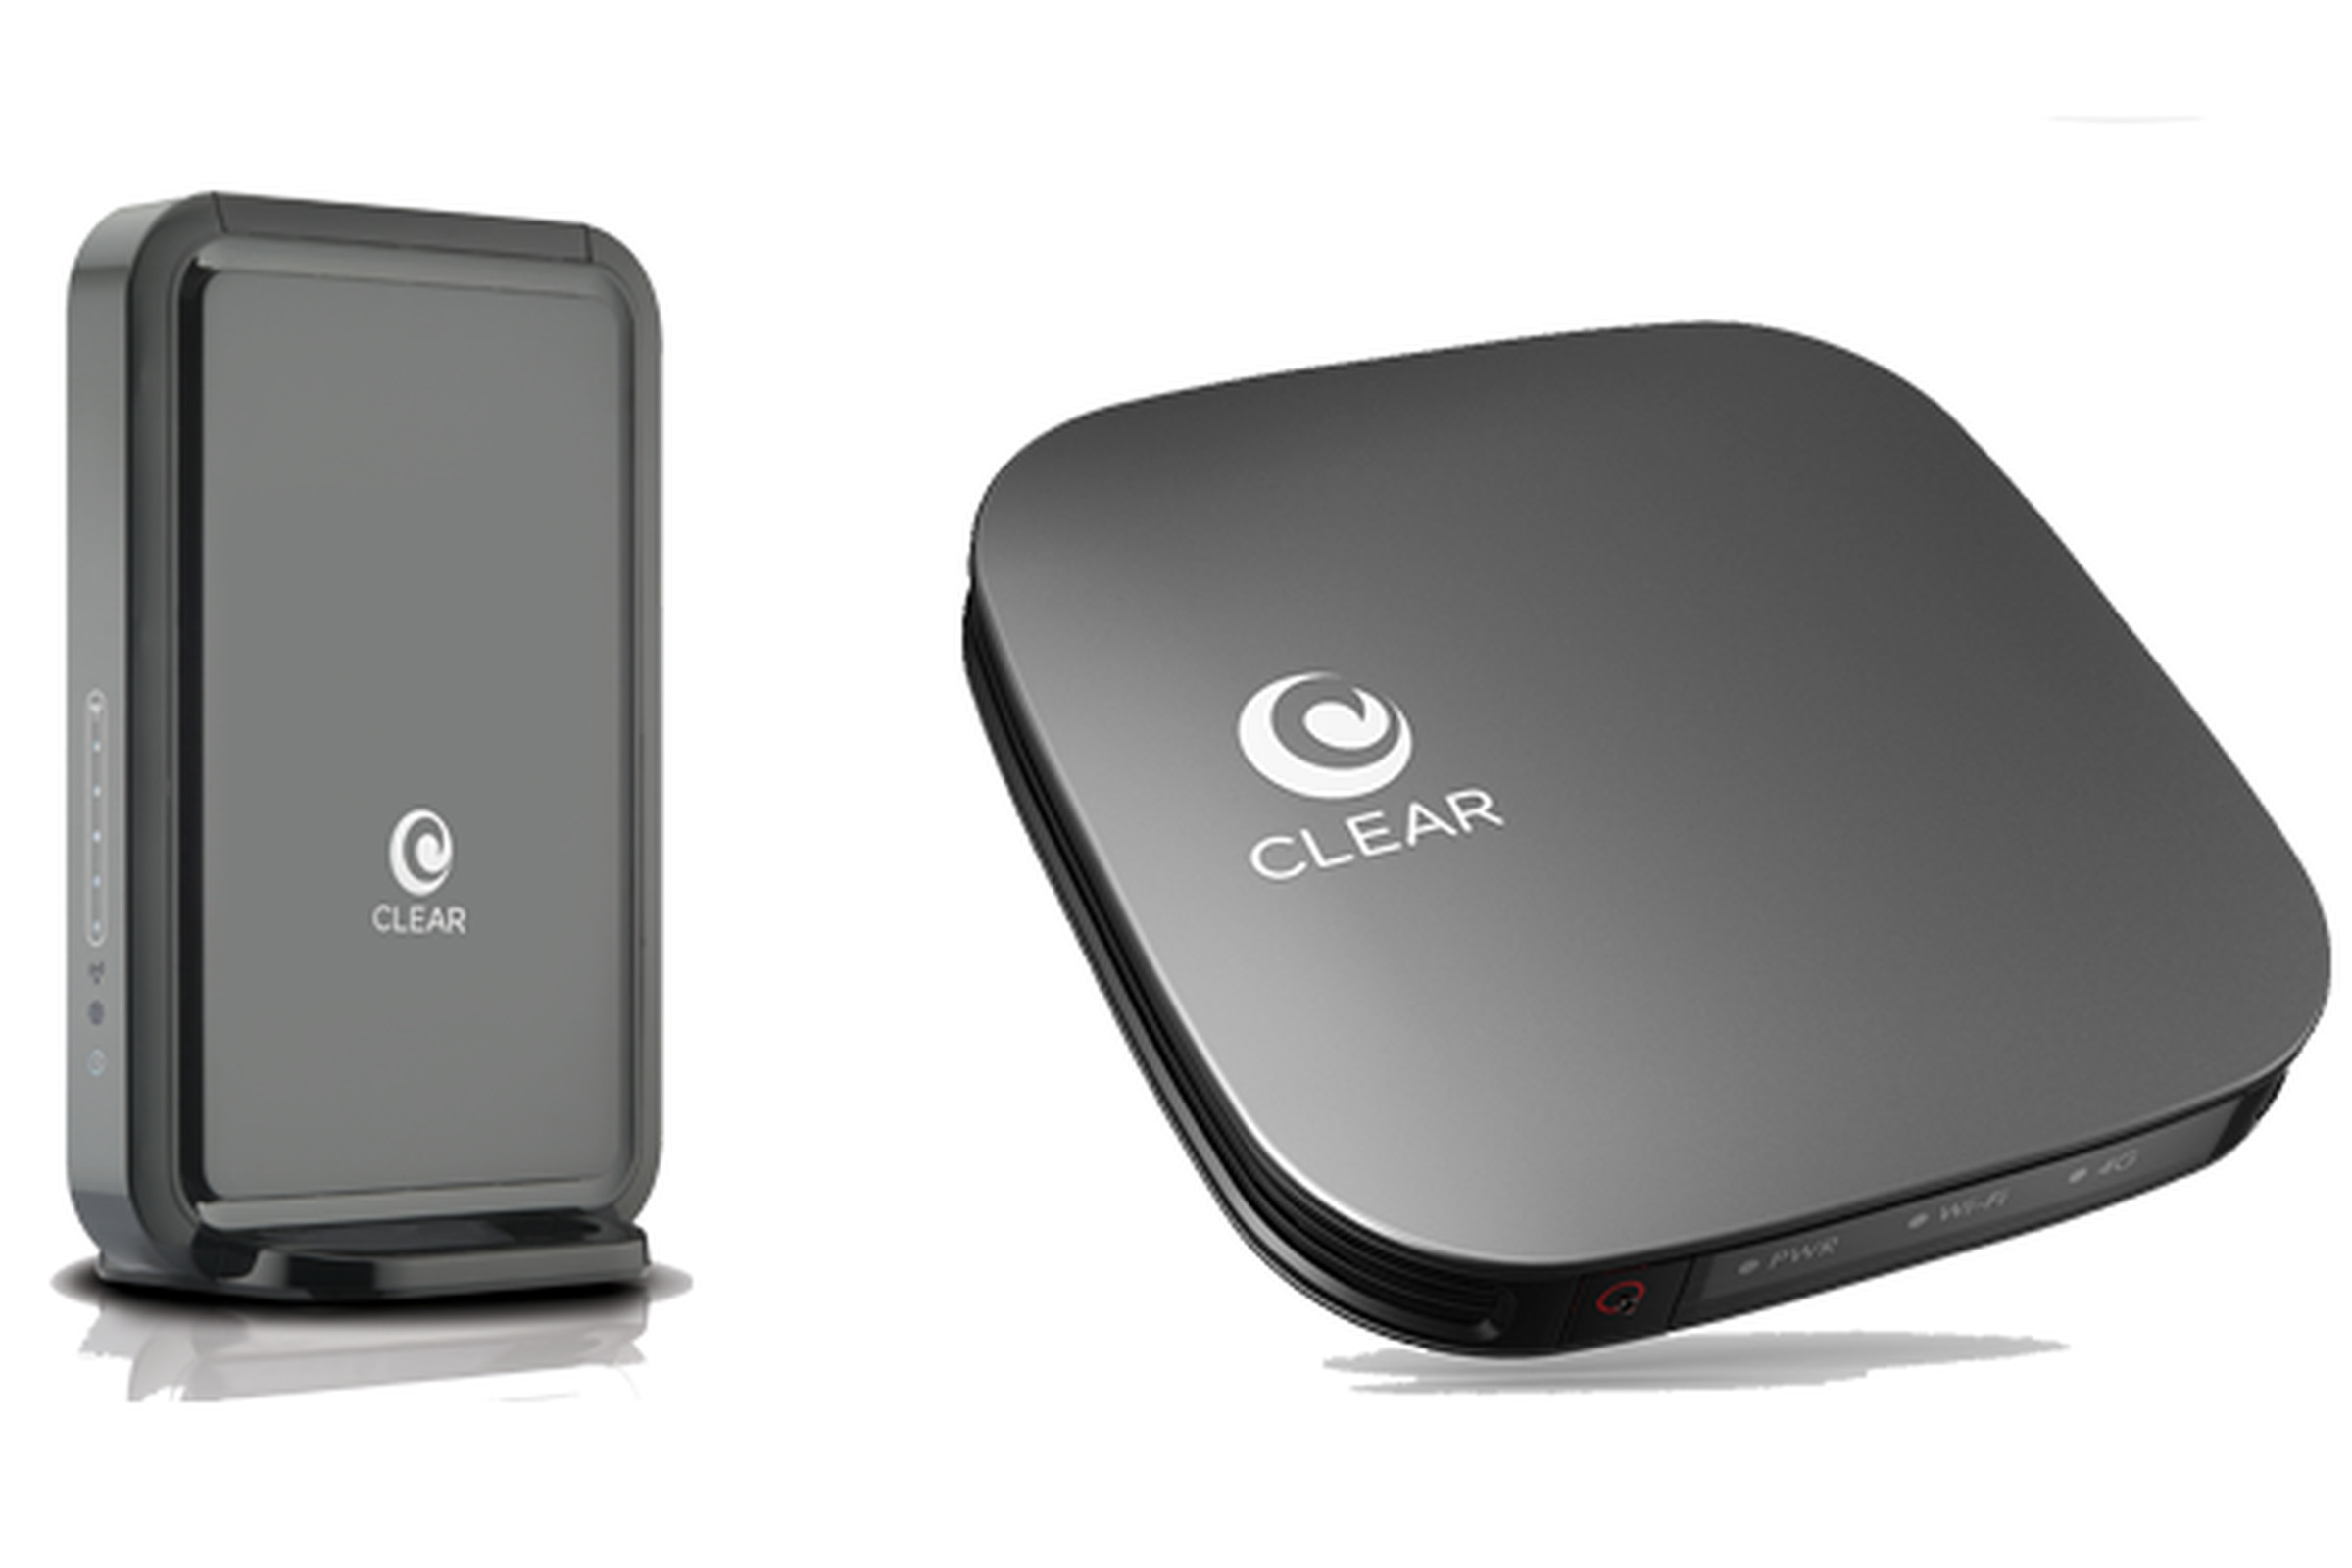 Clear WiMax hotspot and router